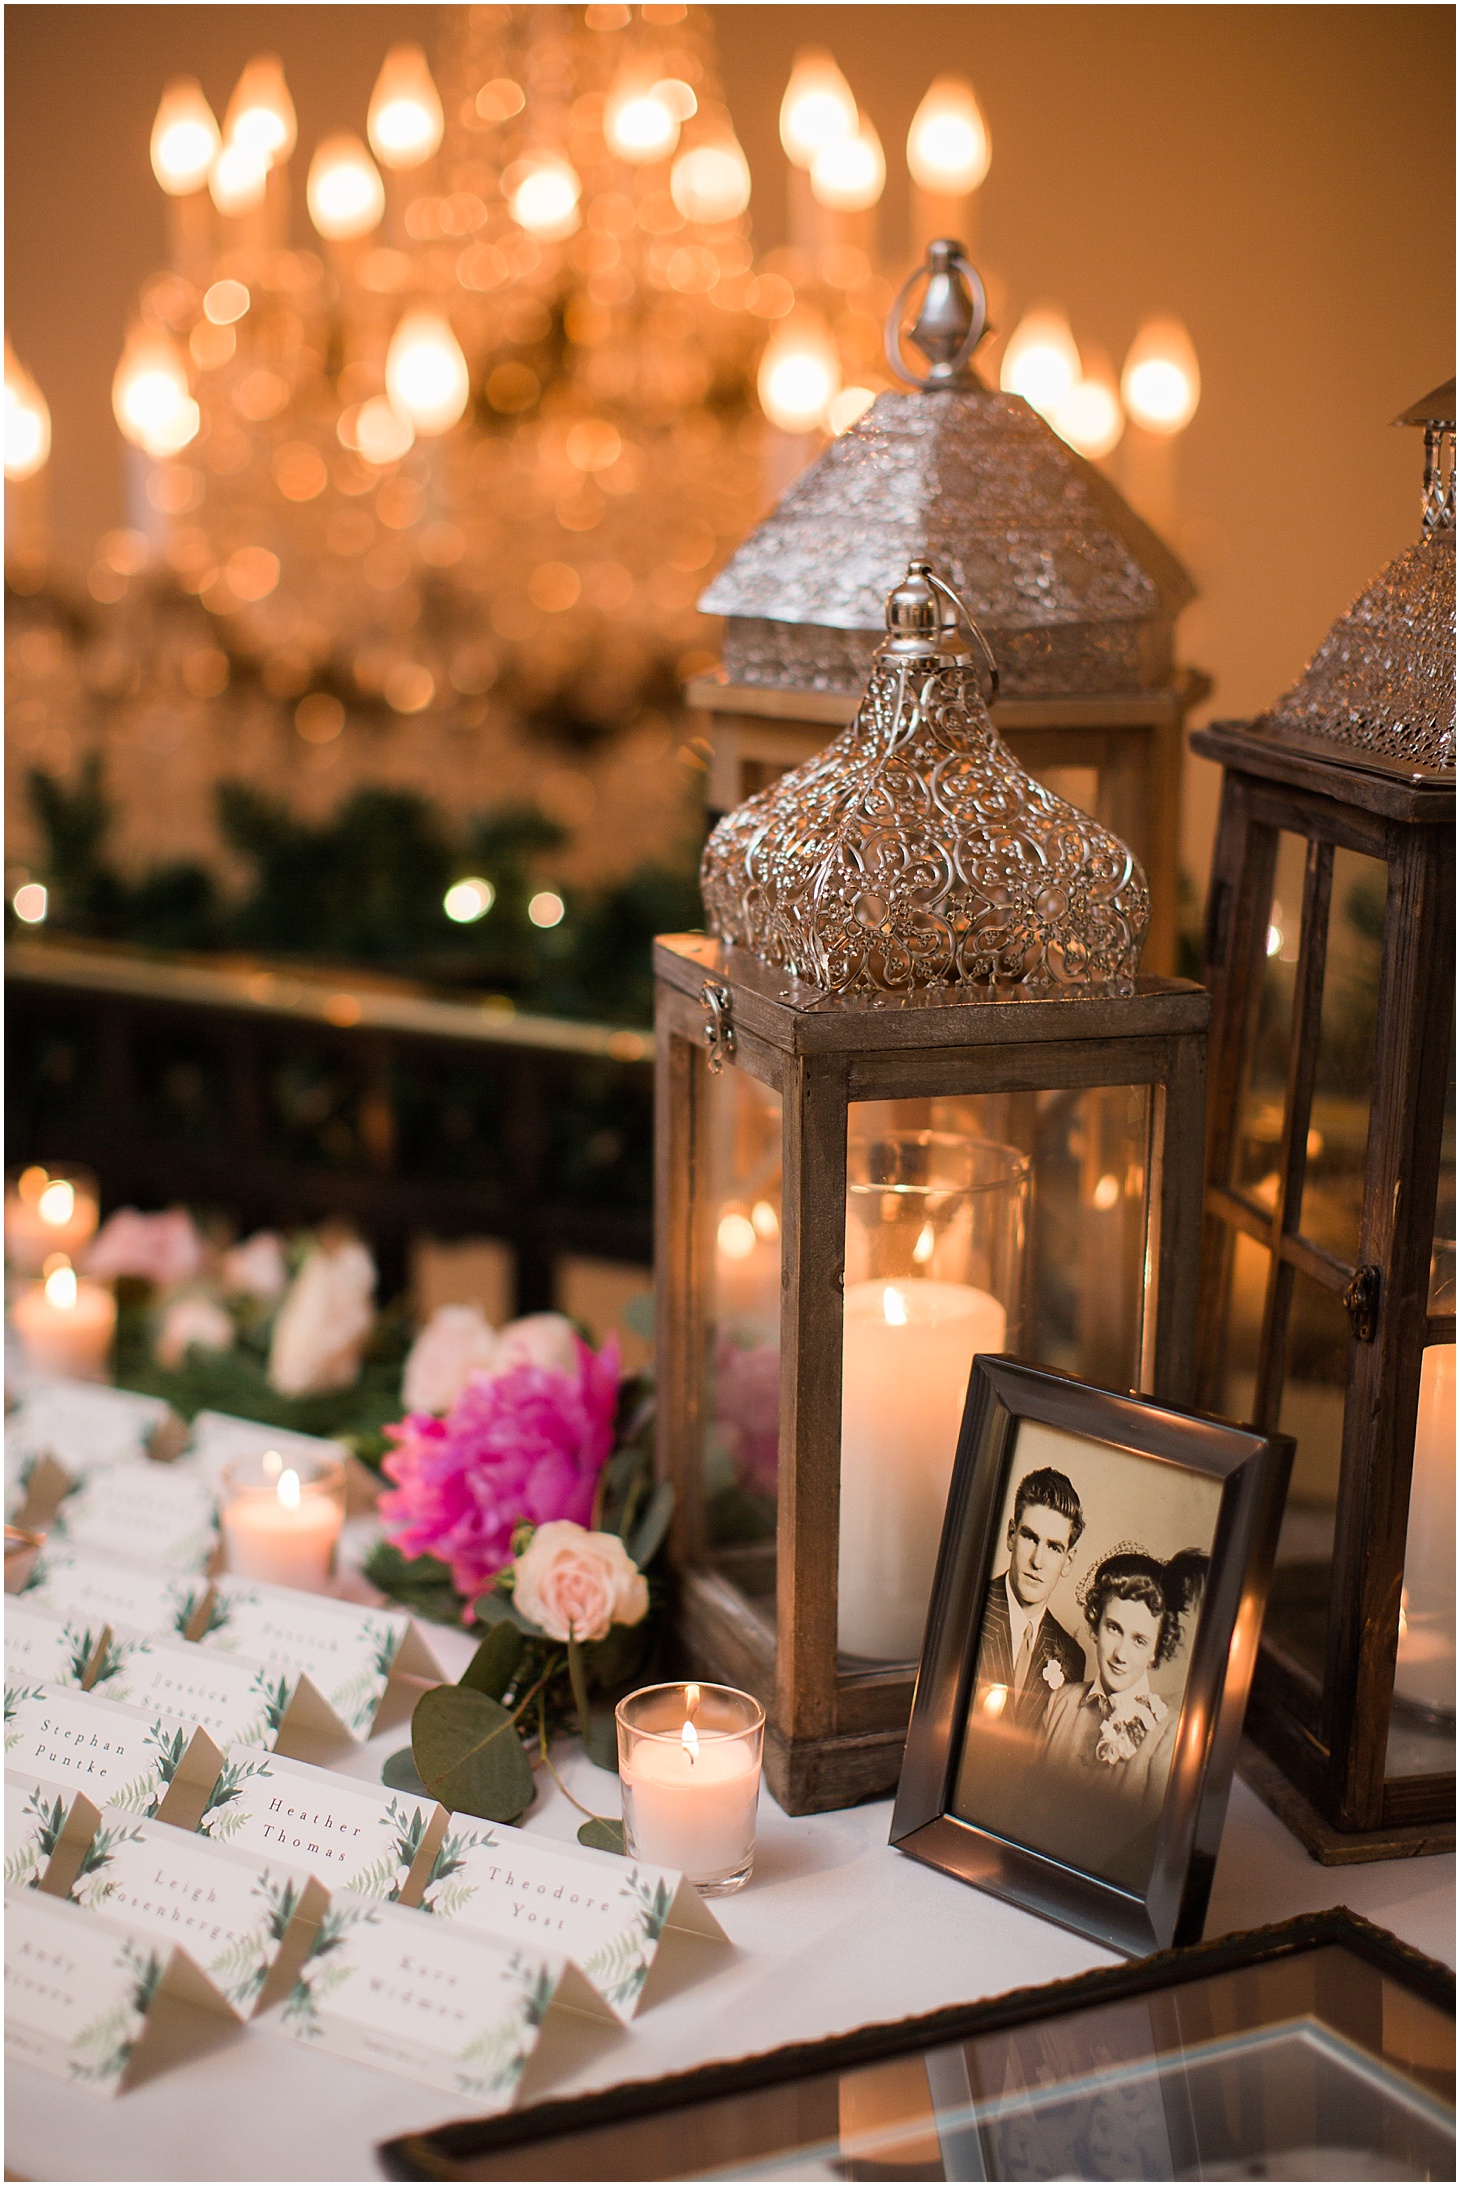 Wedding Reception at the Army and Navy Club | Luxe Winter Wedding in Washington, DC | Sarah Bradshaw Photography | Washington DC Wedding Photographer